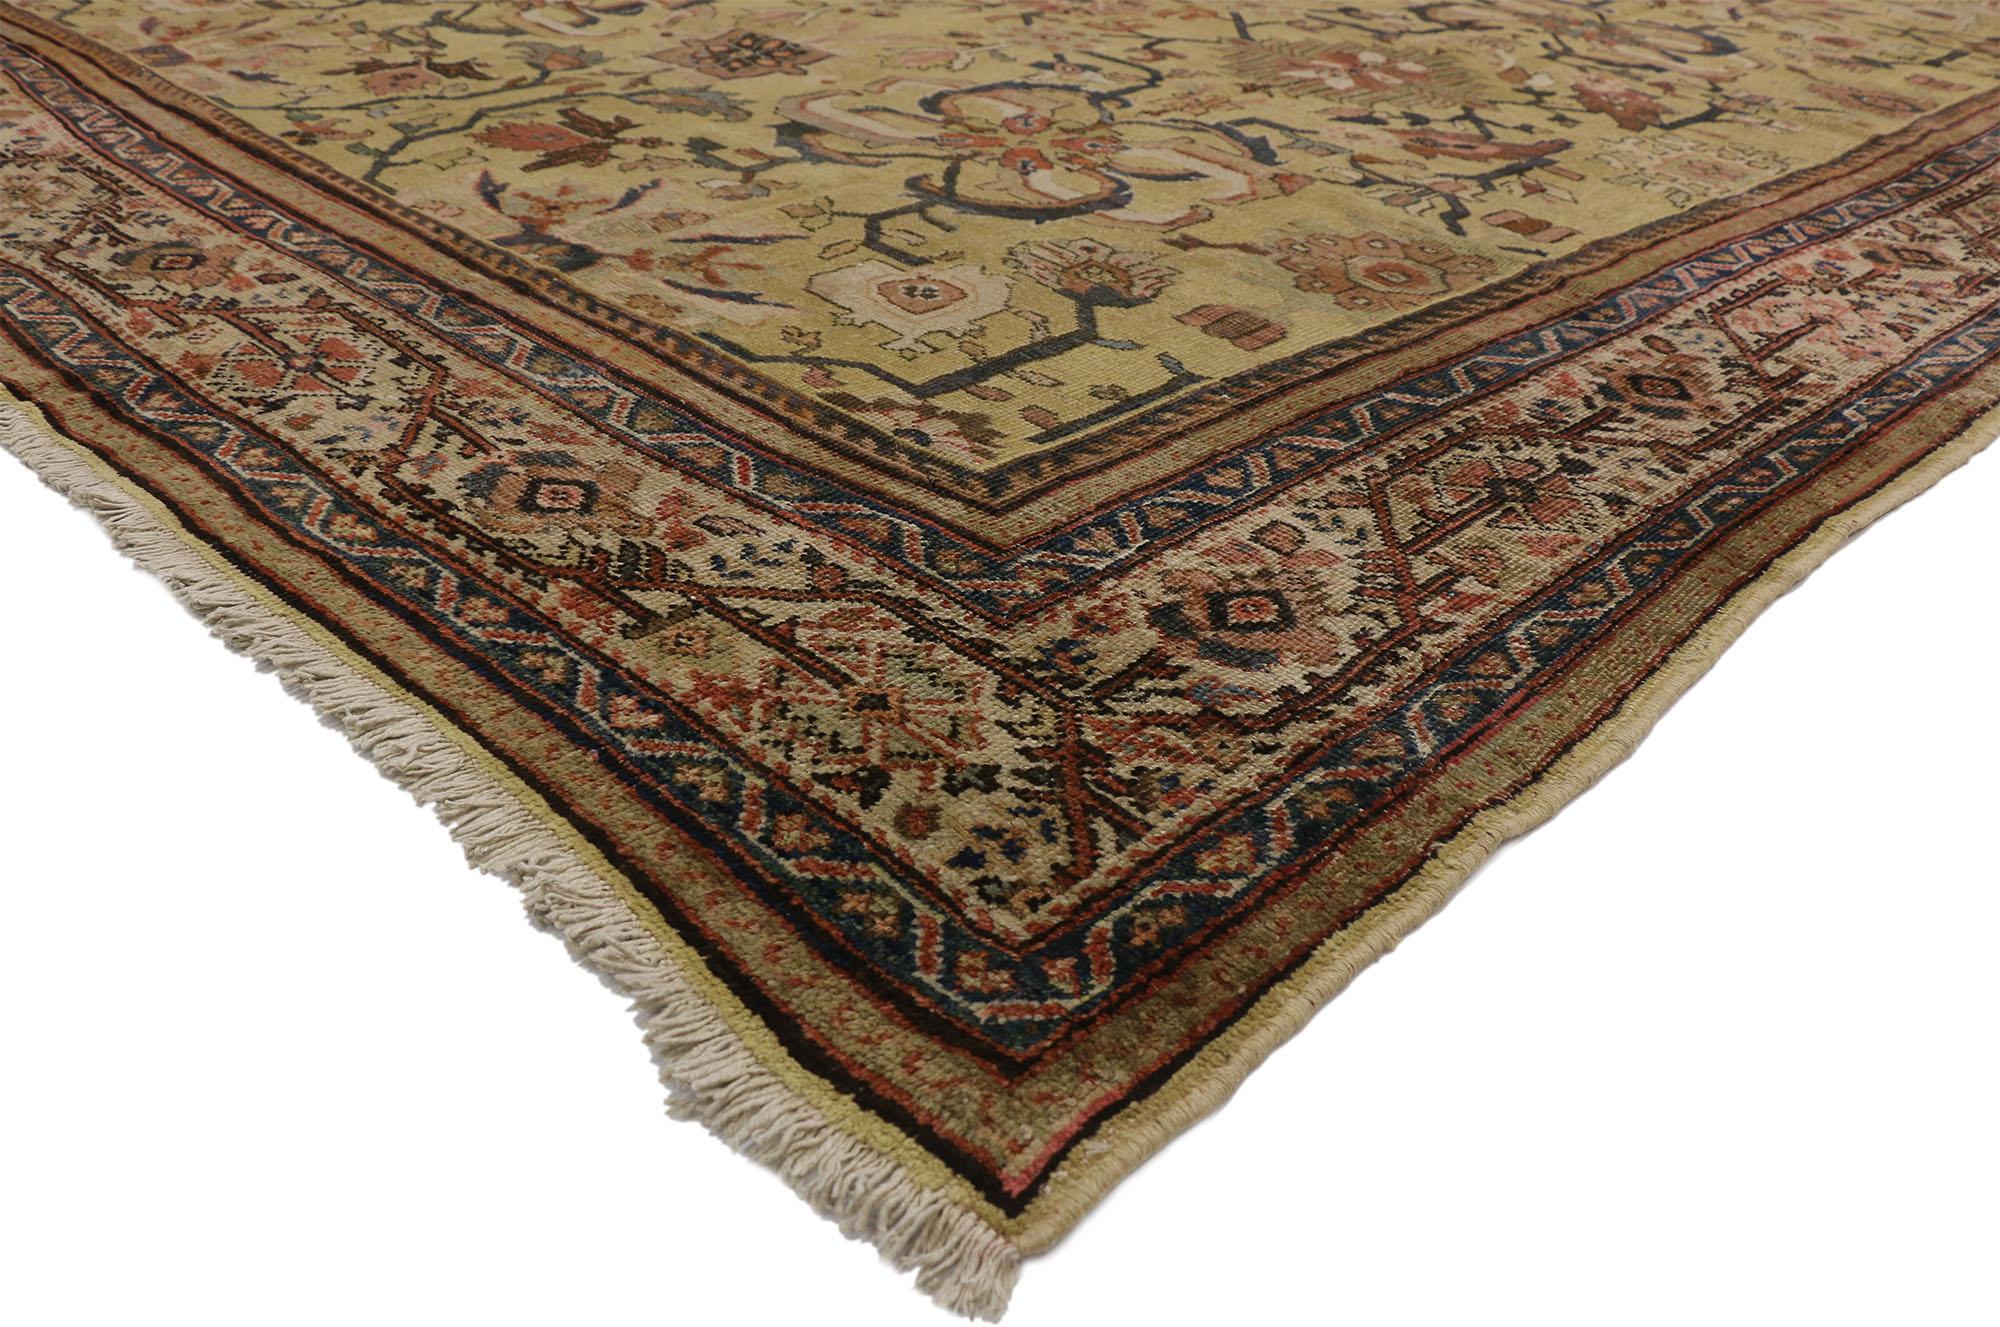 73833 Late 19th Century Distressed Antique Persian Sultanabad rug with Warm Tuscan Italian style 10'06 x 13'06. With its timeless design and warm earthy hues, this hand-knotted wool distressed antique Persian Sultanabad rug beautifully embodies a